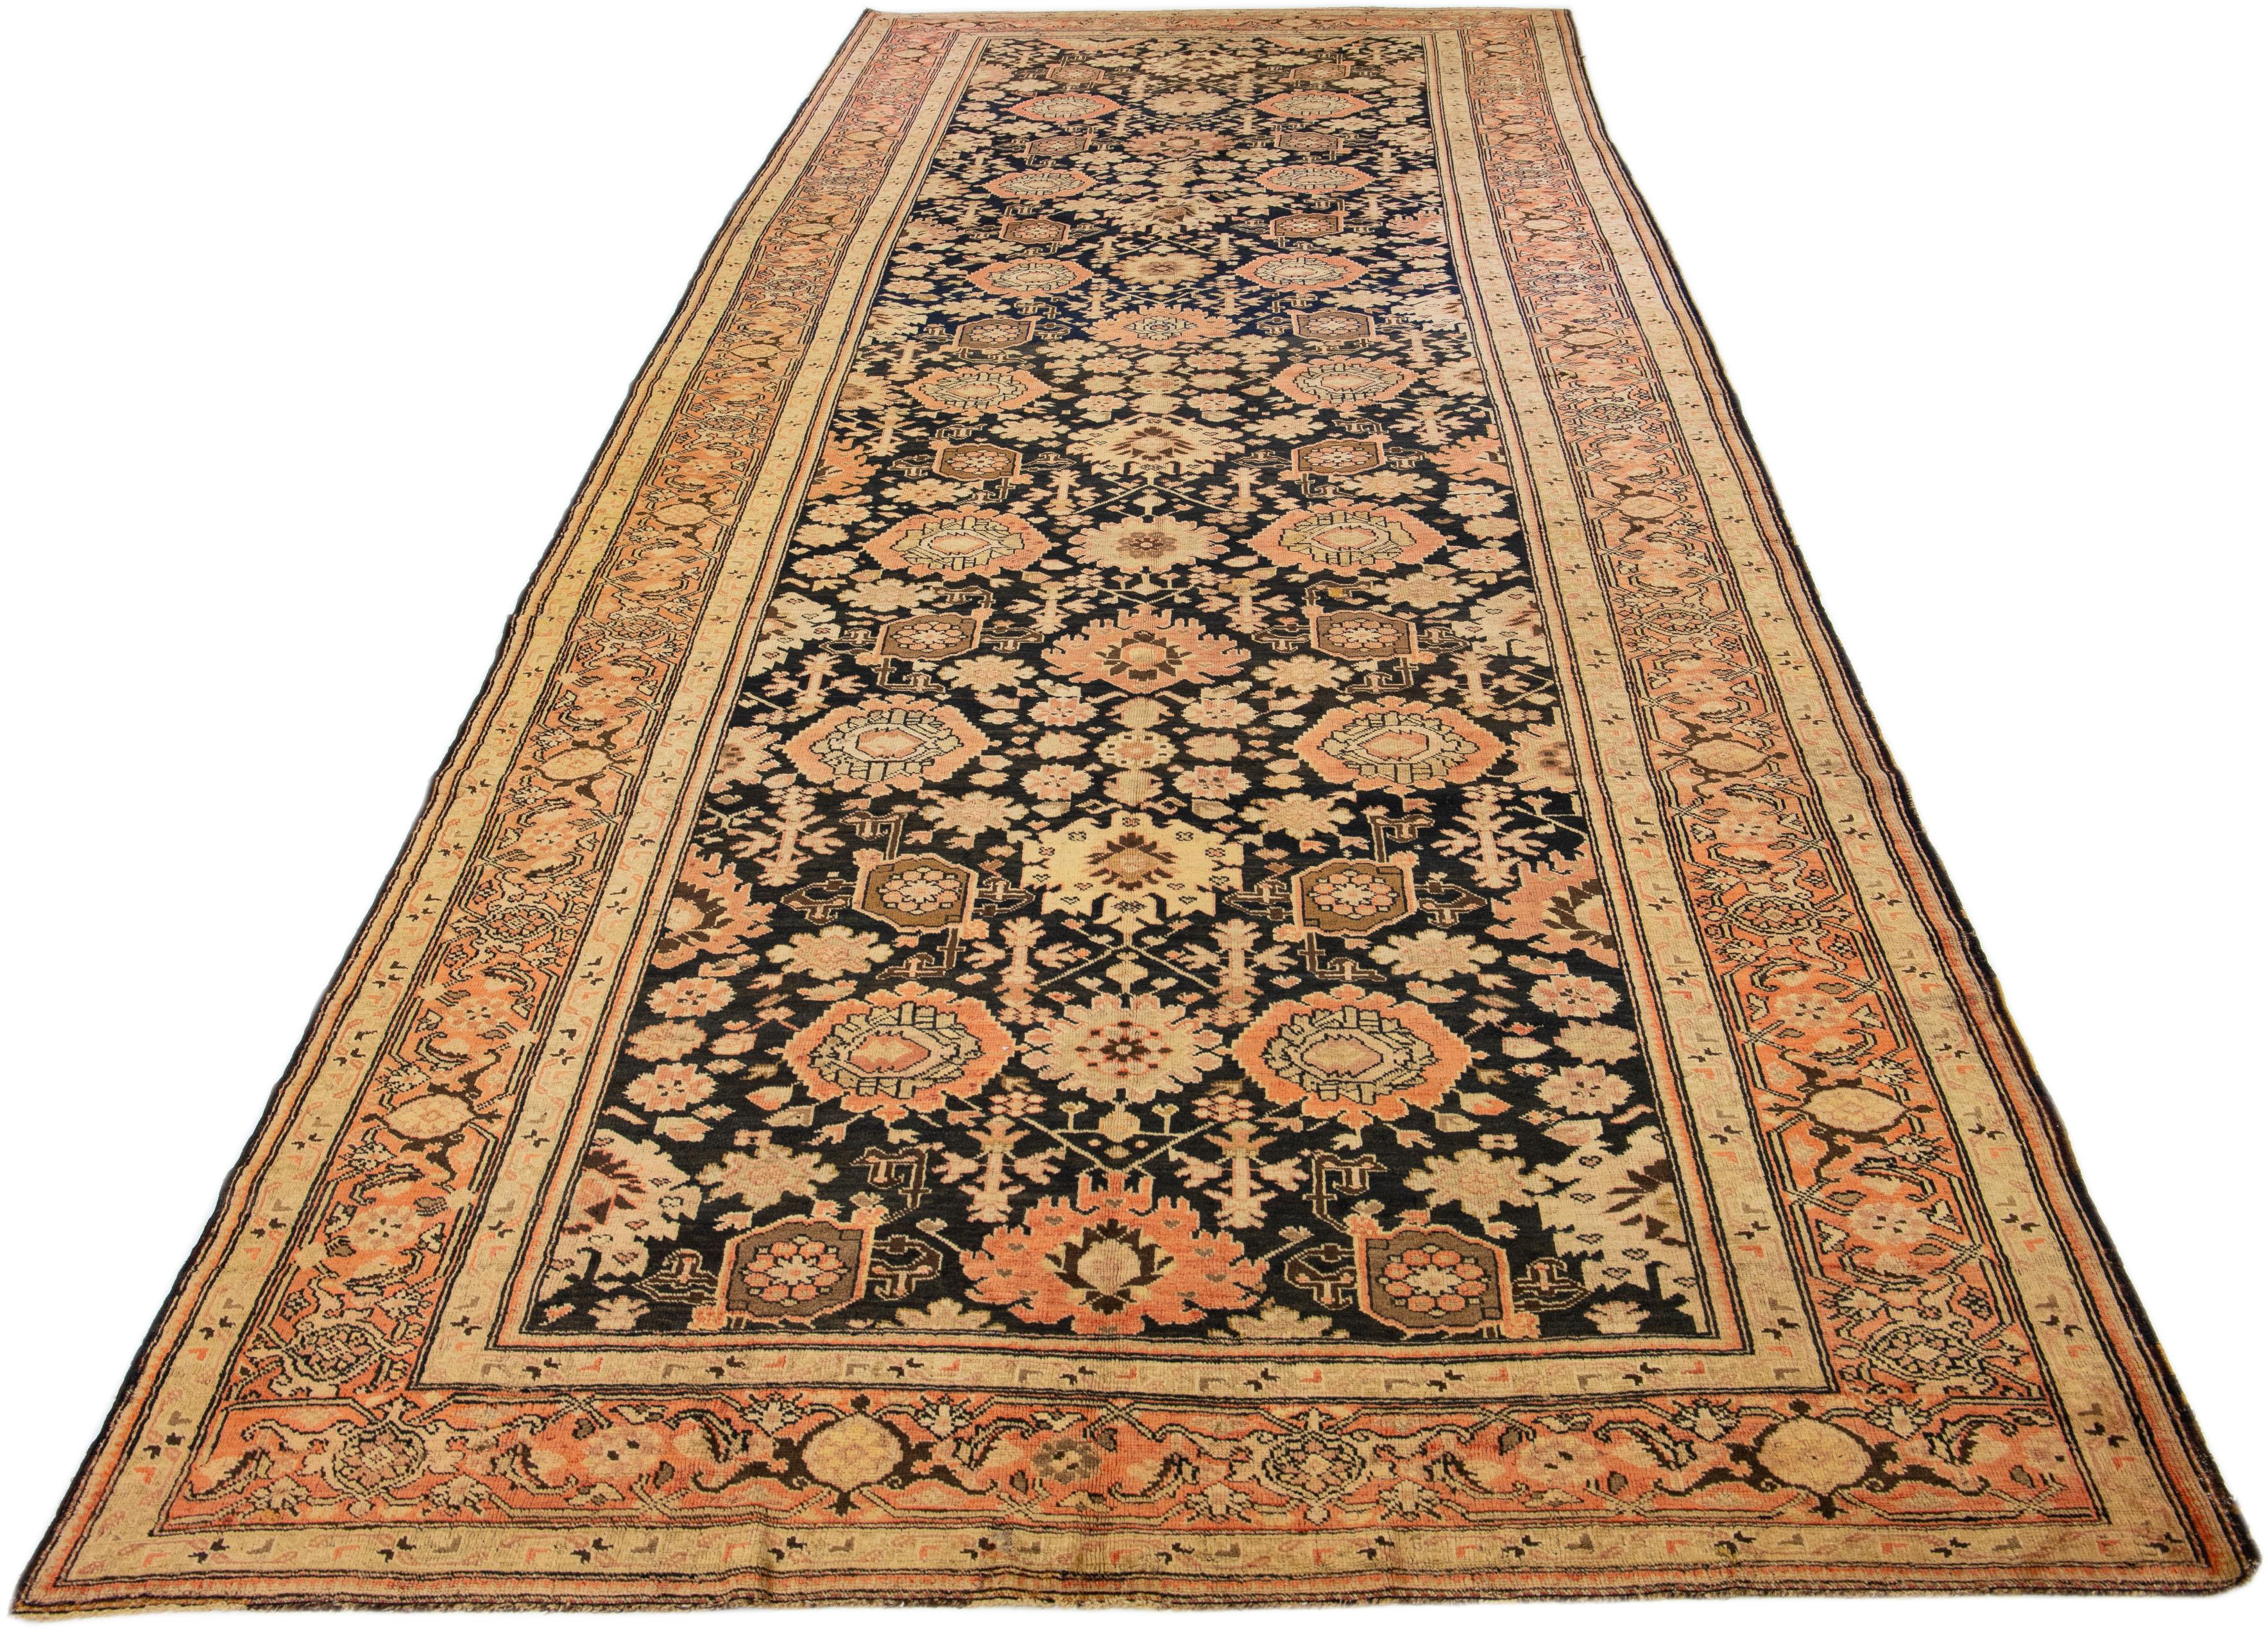 Beautiful antique Turkish Kurd hand-knotted runner with a dark blue color field. This piece has peach and beige accents in an all-over floral design. 

This rug measures 7'2